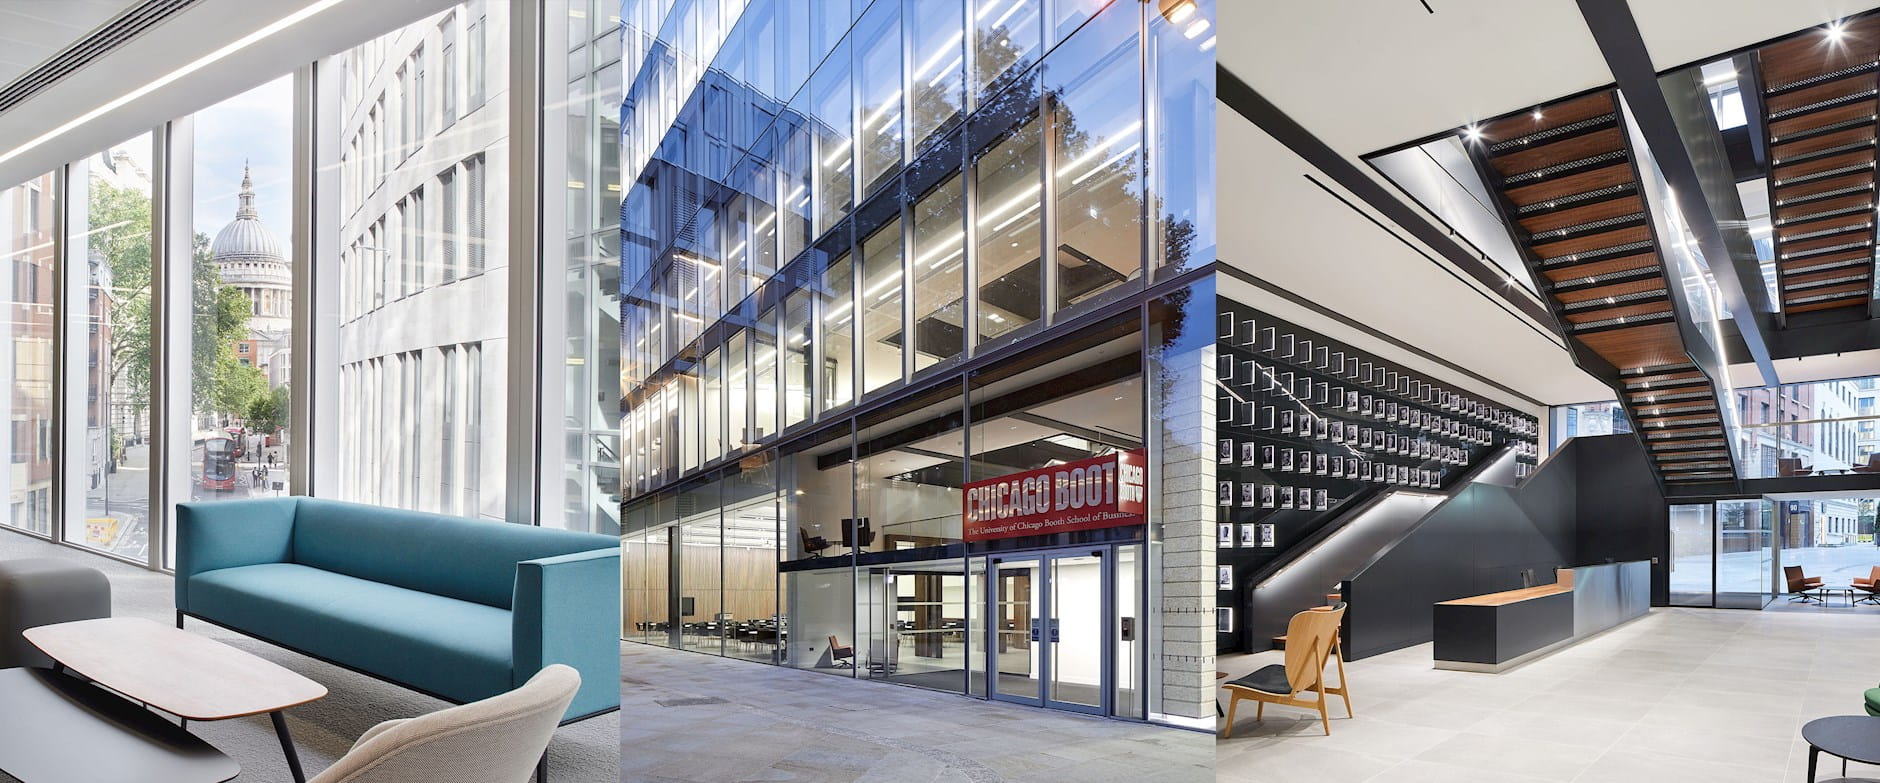 Collage of images of Booth's London campus, showing lounge, front entrance, and staircases.